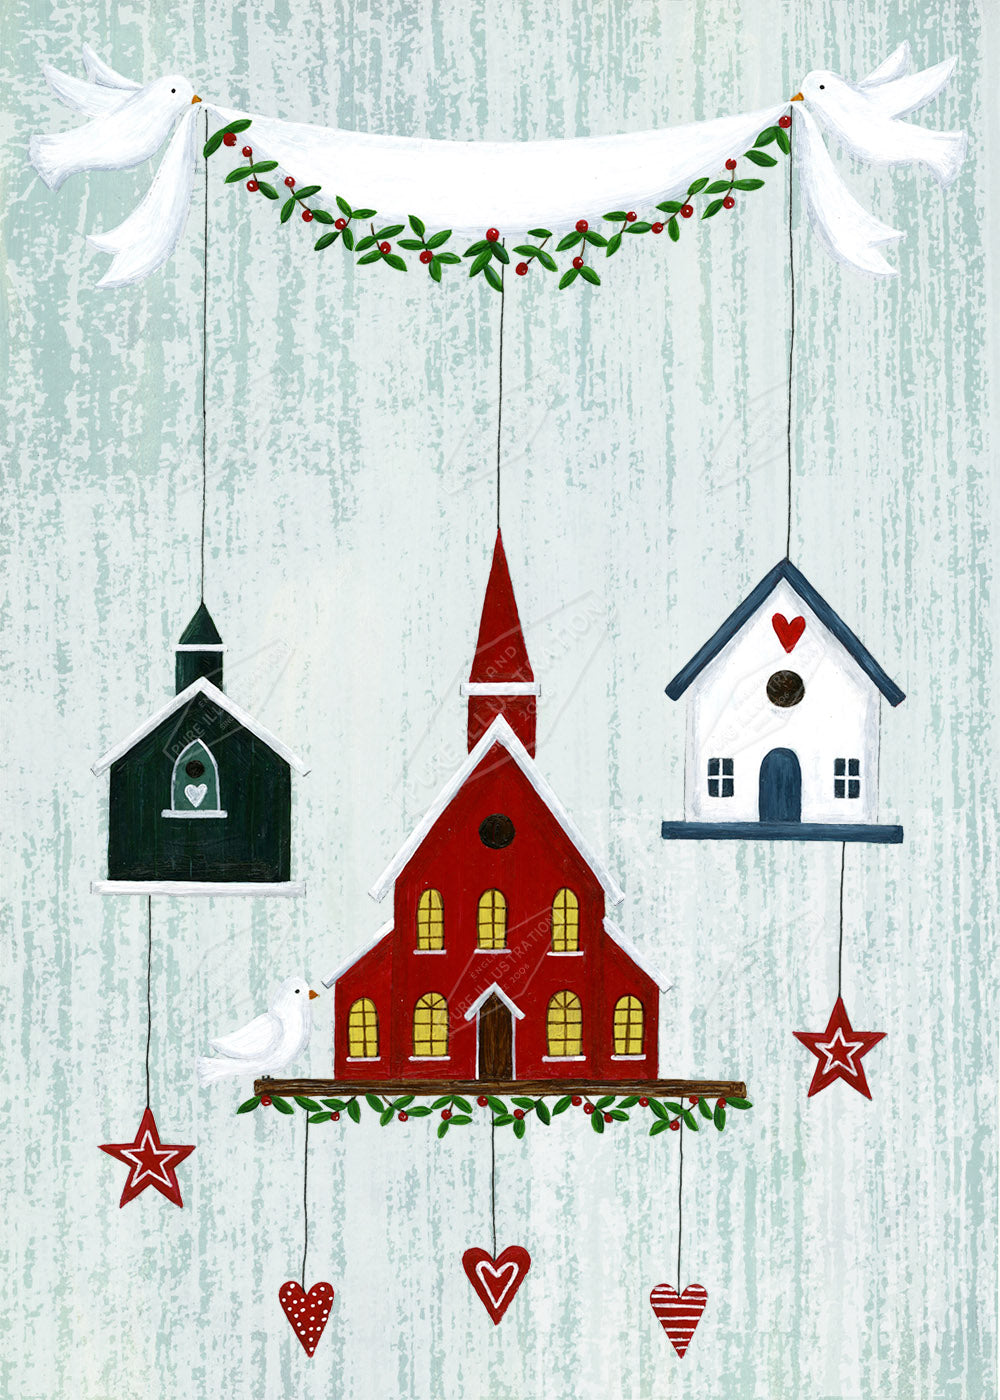 00026861AAI - New England Church Decorations by Anna Aitken - Pure Art Licensing & Surface Design Agency